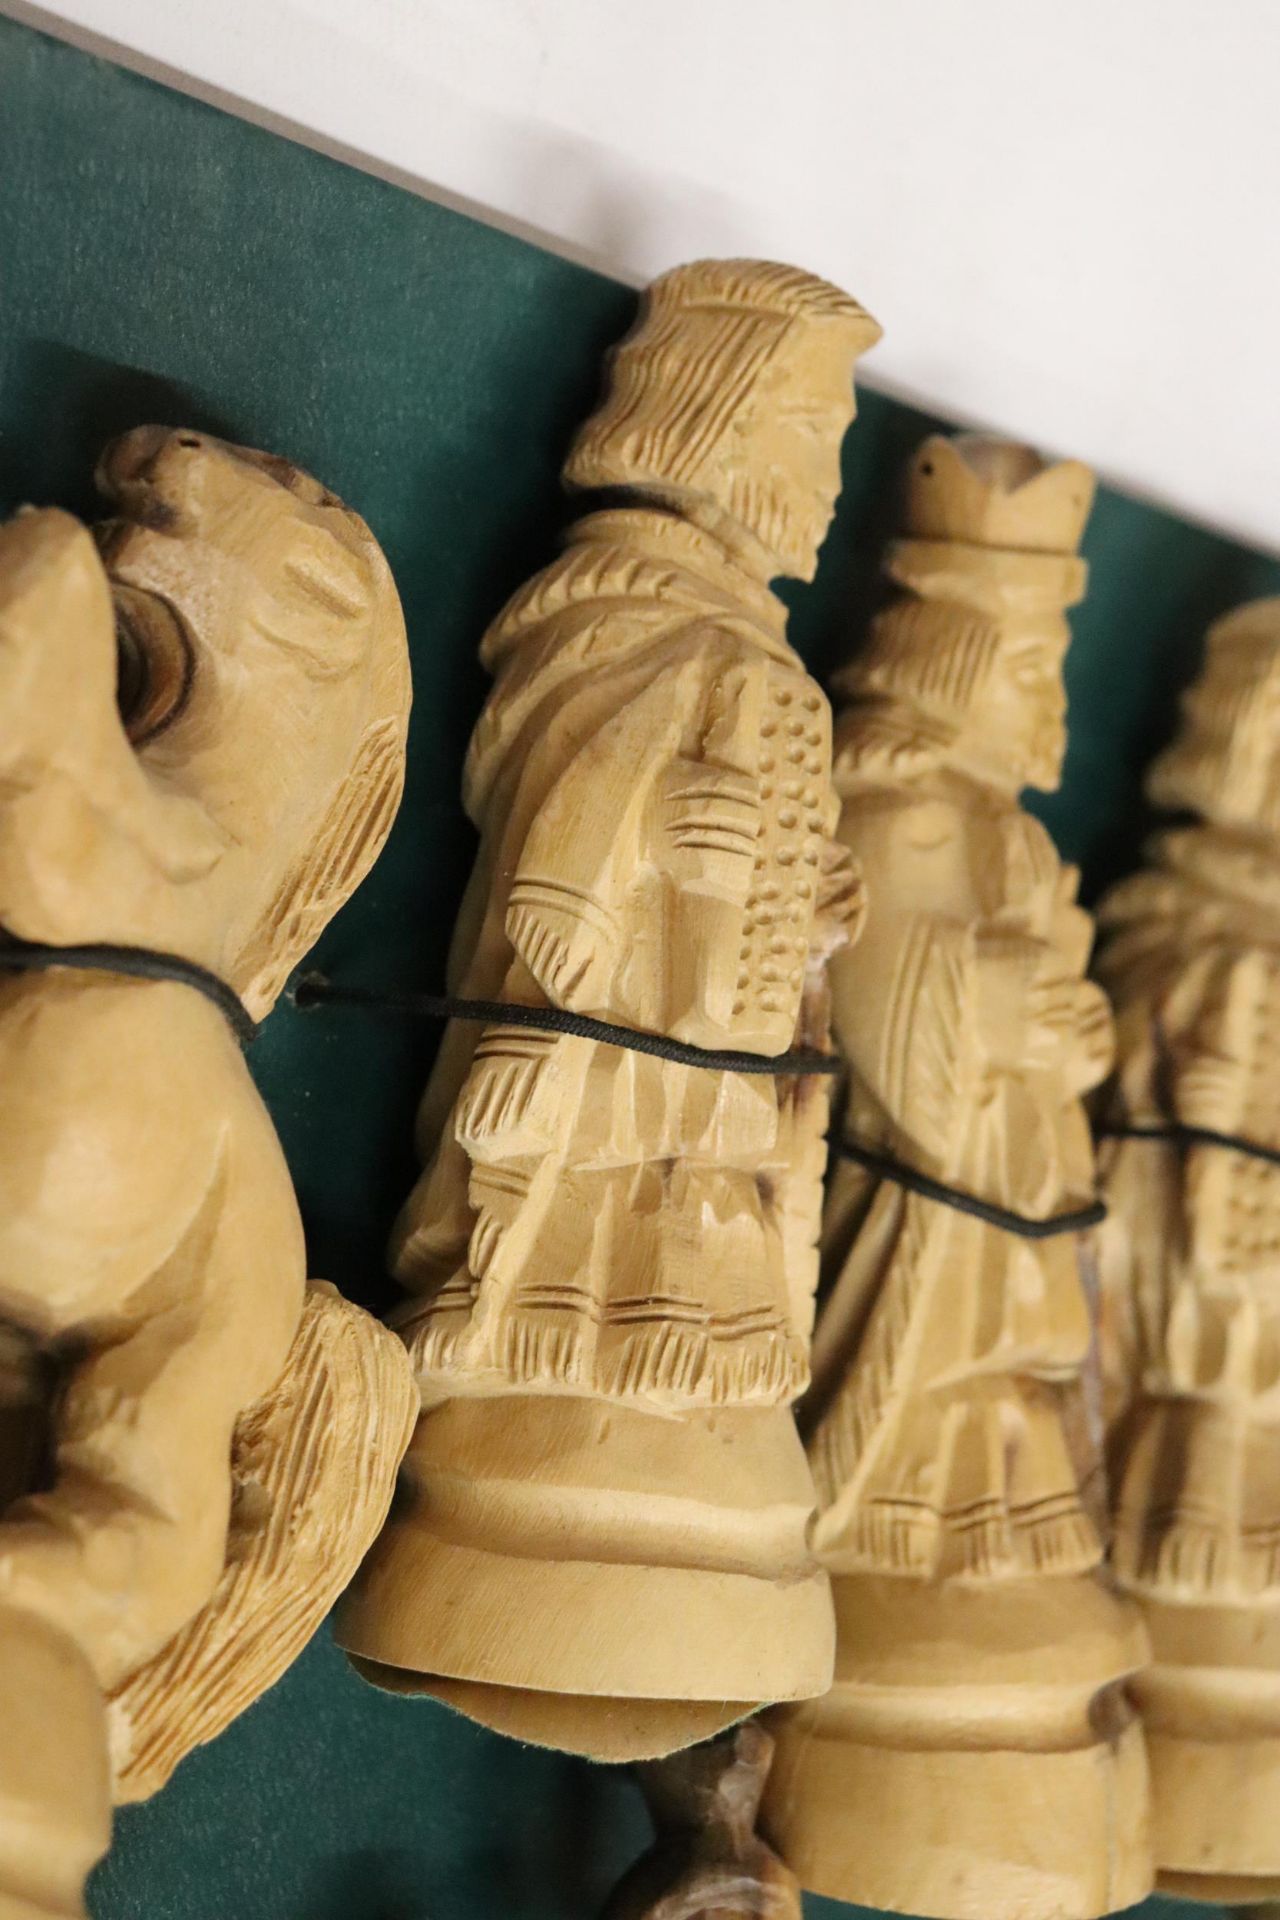 A HAND CARVED WOODEN CHESS SET FROM TAMIL SOUTH INDIA - Image 9 of 10